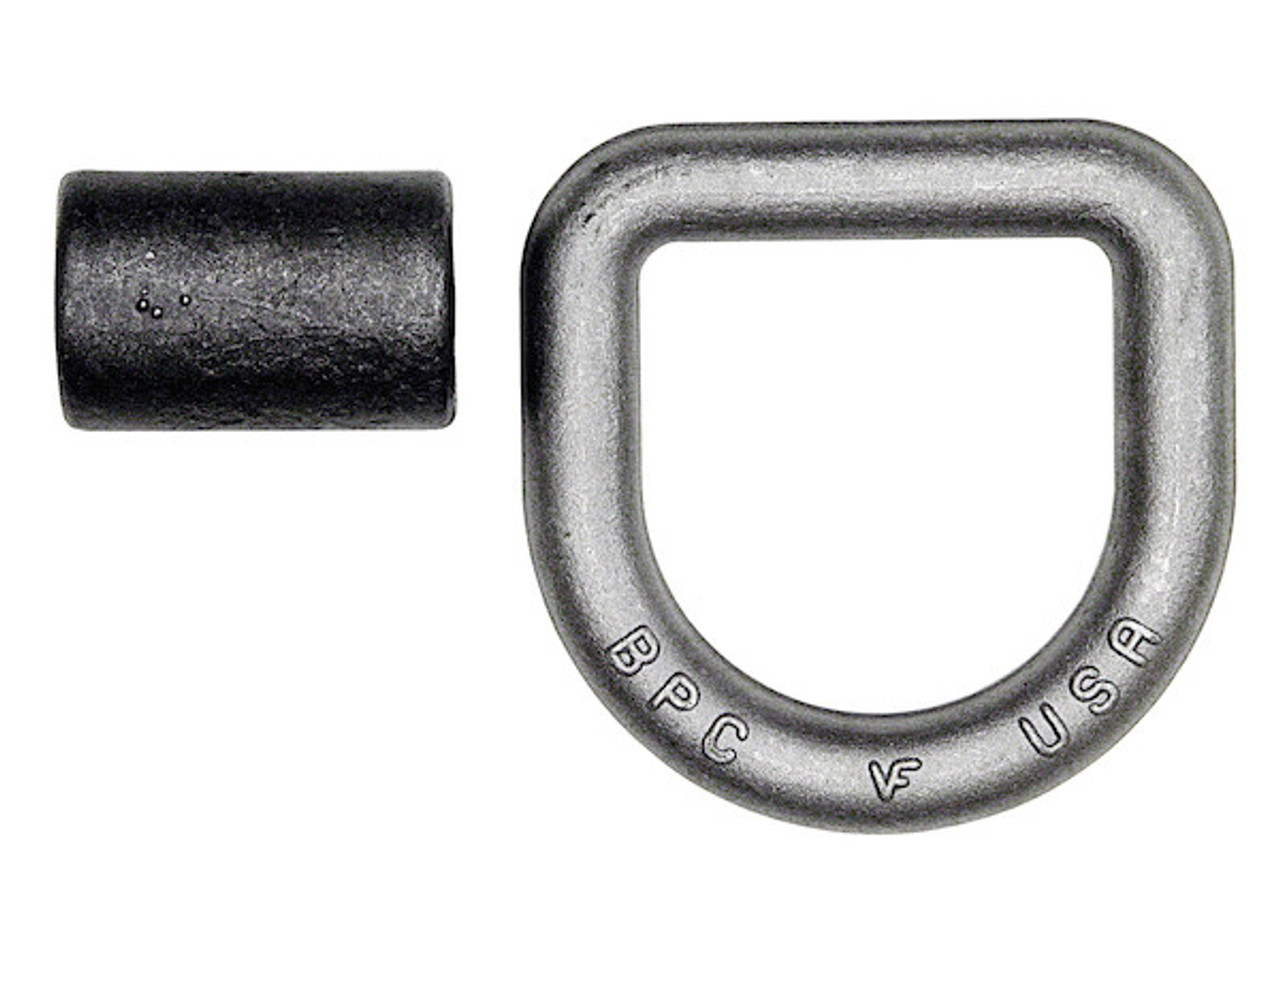 B46 - Domestically Forged 3/4 Inch Forged D-Ring With Weld-On Mounting Bracket